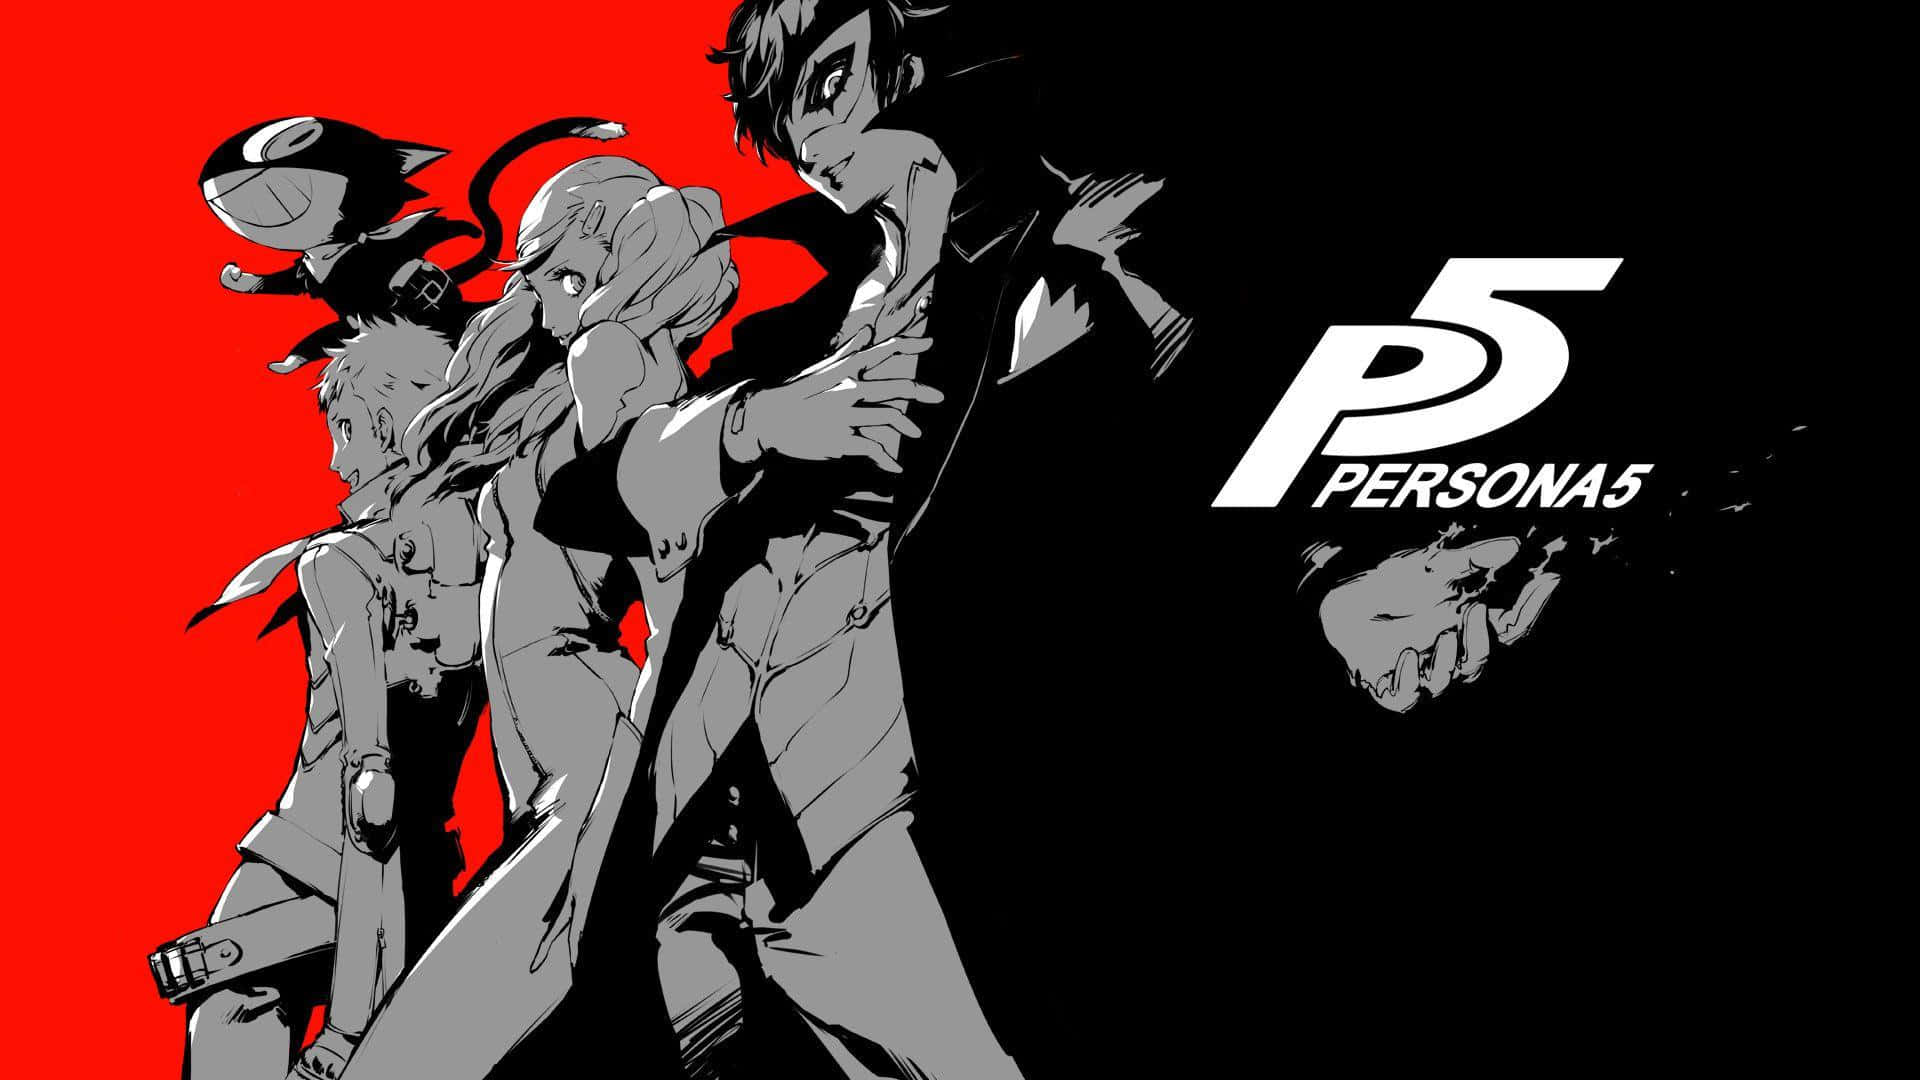 "Are you ready to join the Phantom Thieves?" Wallpaper